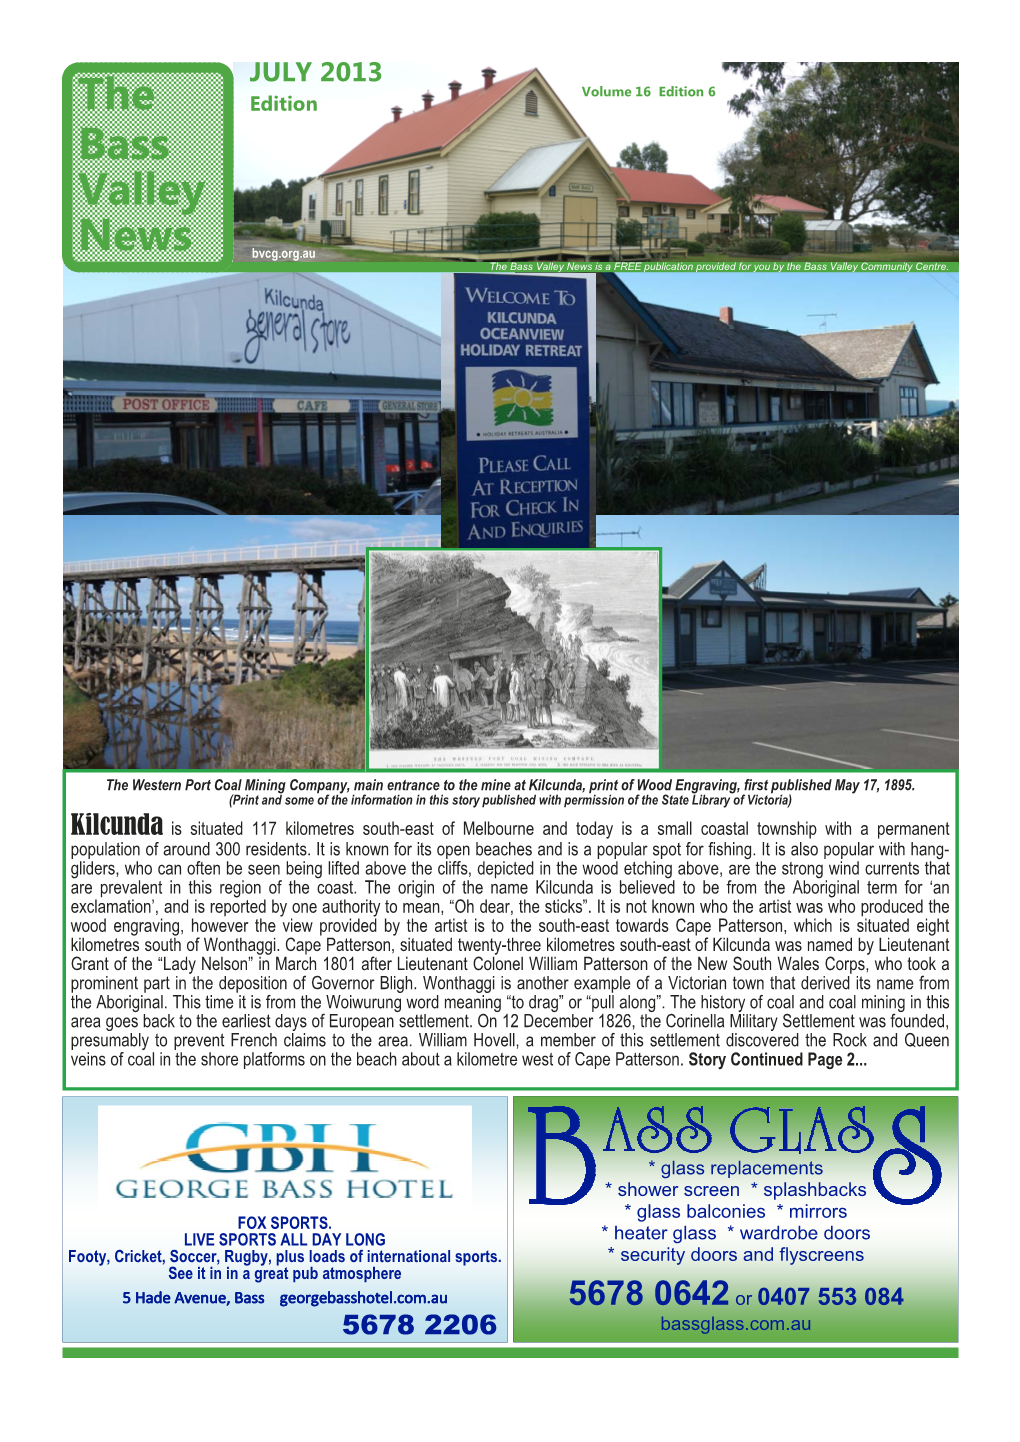 The Bass Valley News Is a FREE Publication Provided for You by the Bass Valley Community Centre